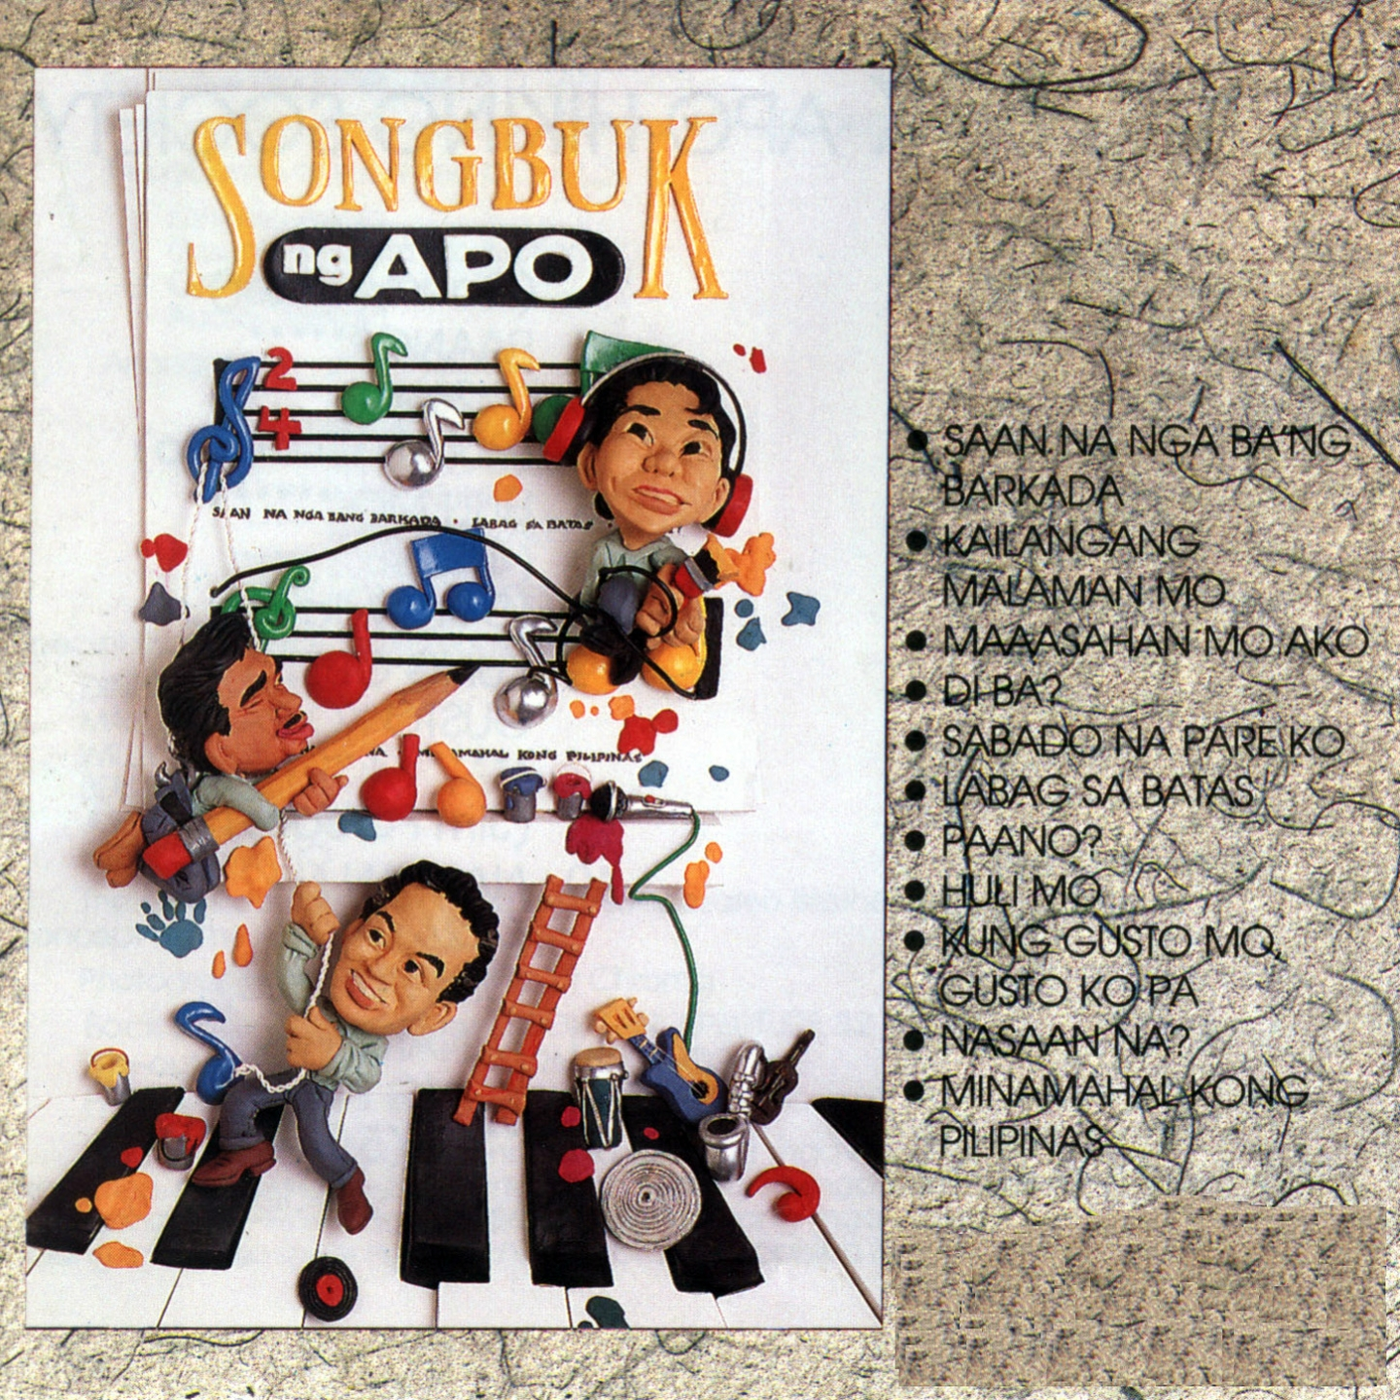 apo hiking society discography download